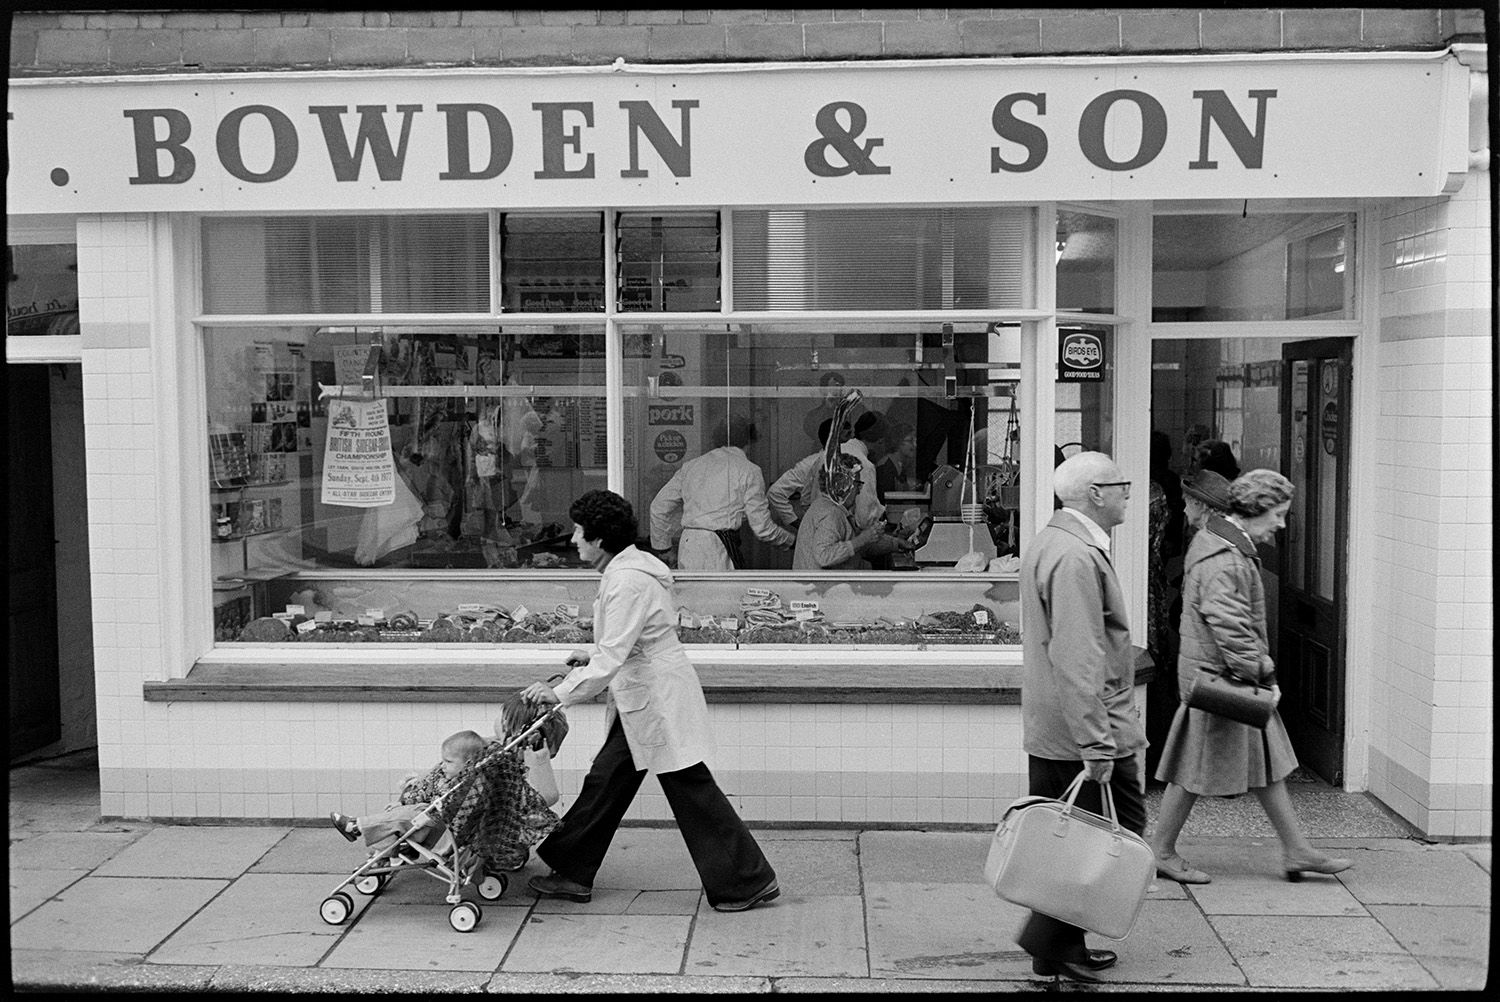 Interior of butcher's shop with customers, also front of shop. 
[The shop front window of Bowden & Son butcher's shop in South Molton. People are walking past, including a woman pushing a pram. Various cuts of meat are displayed and hung up in the window and staff can be seen serving customers.]